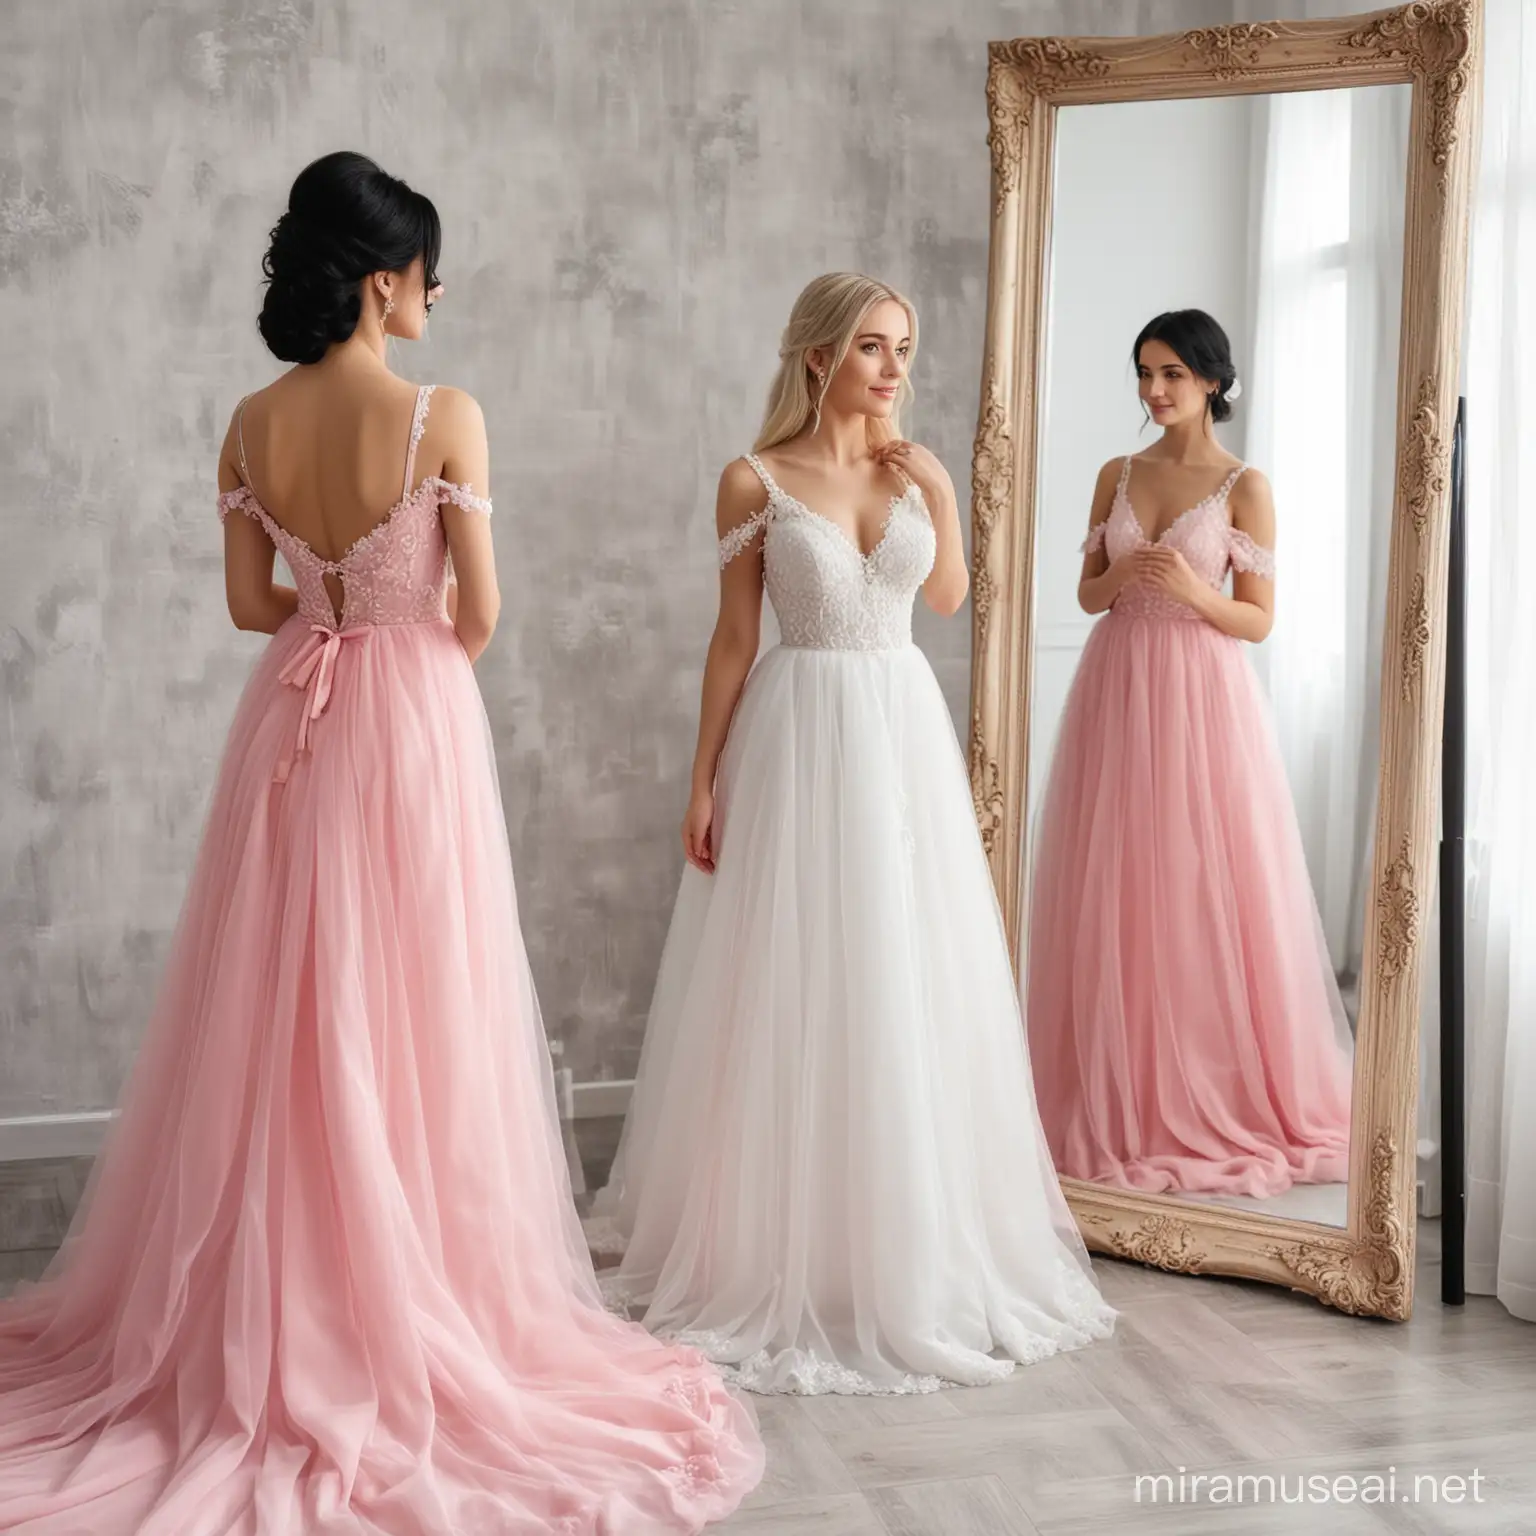 A beautiful blonde girl in a beautiful white wedding dress is standing at the mirror and a girl with black hair is standing next to her in a pink dress